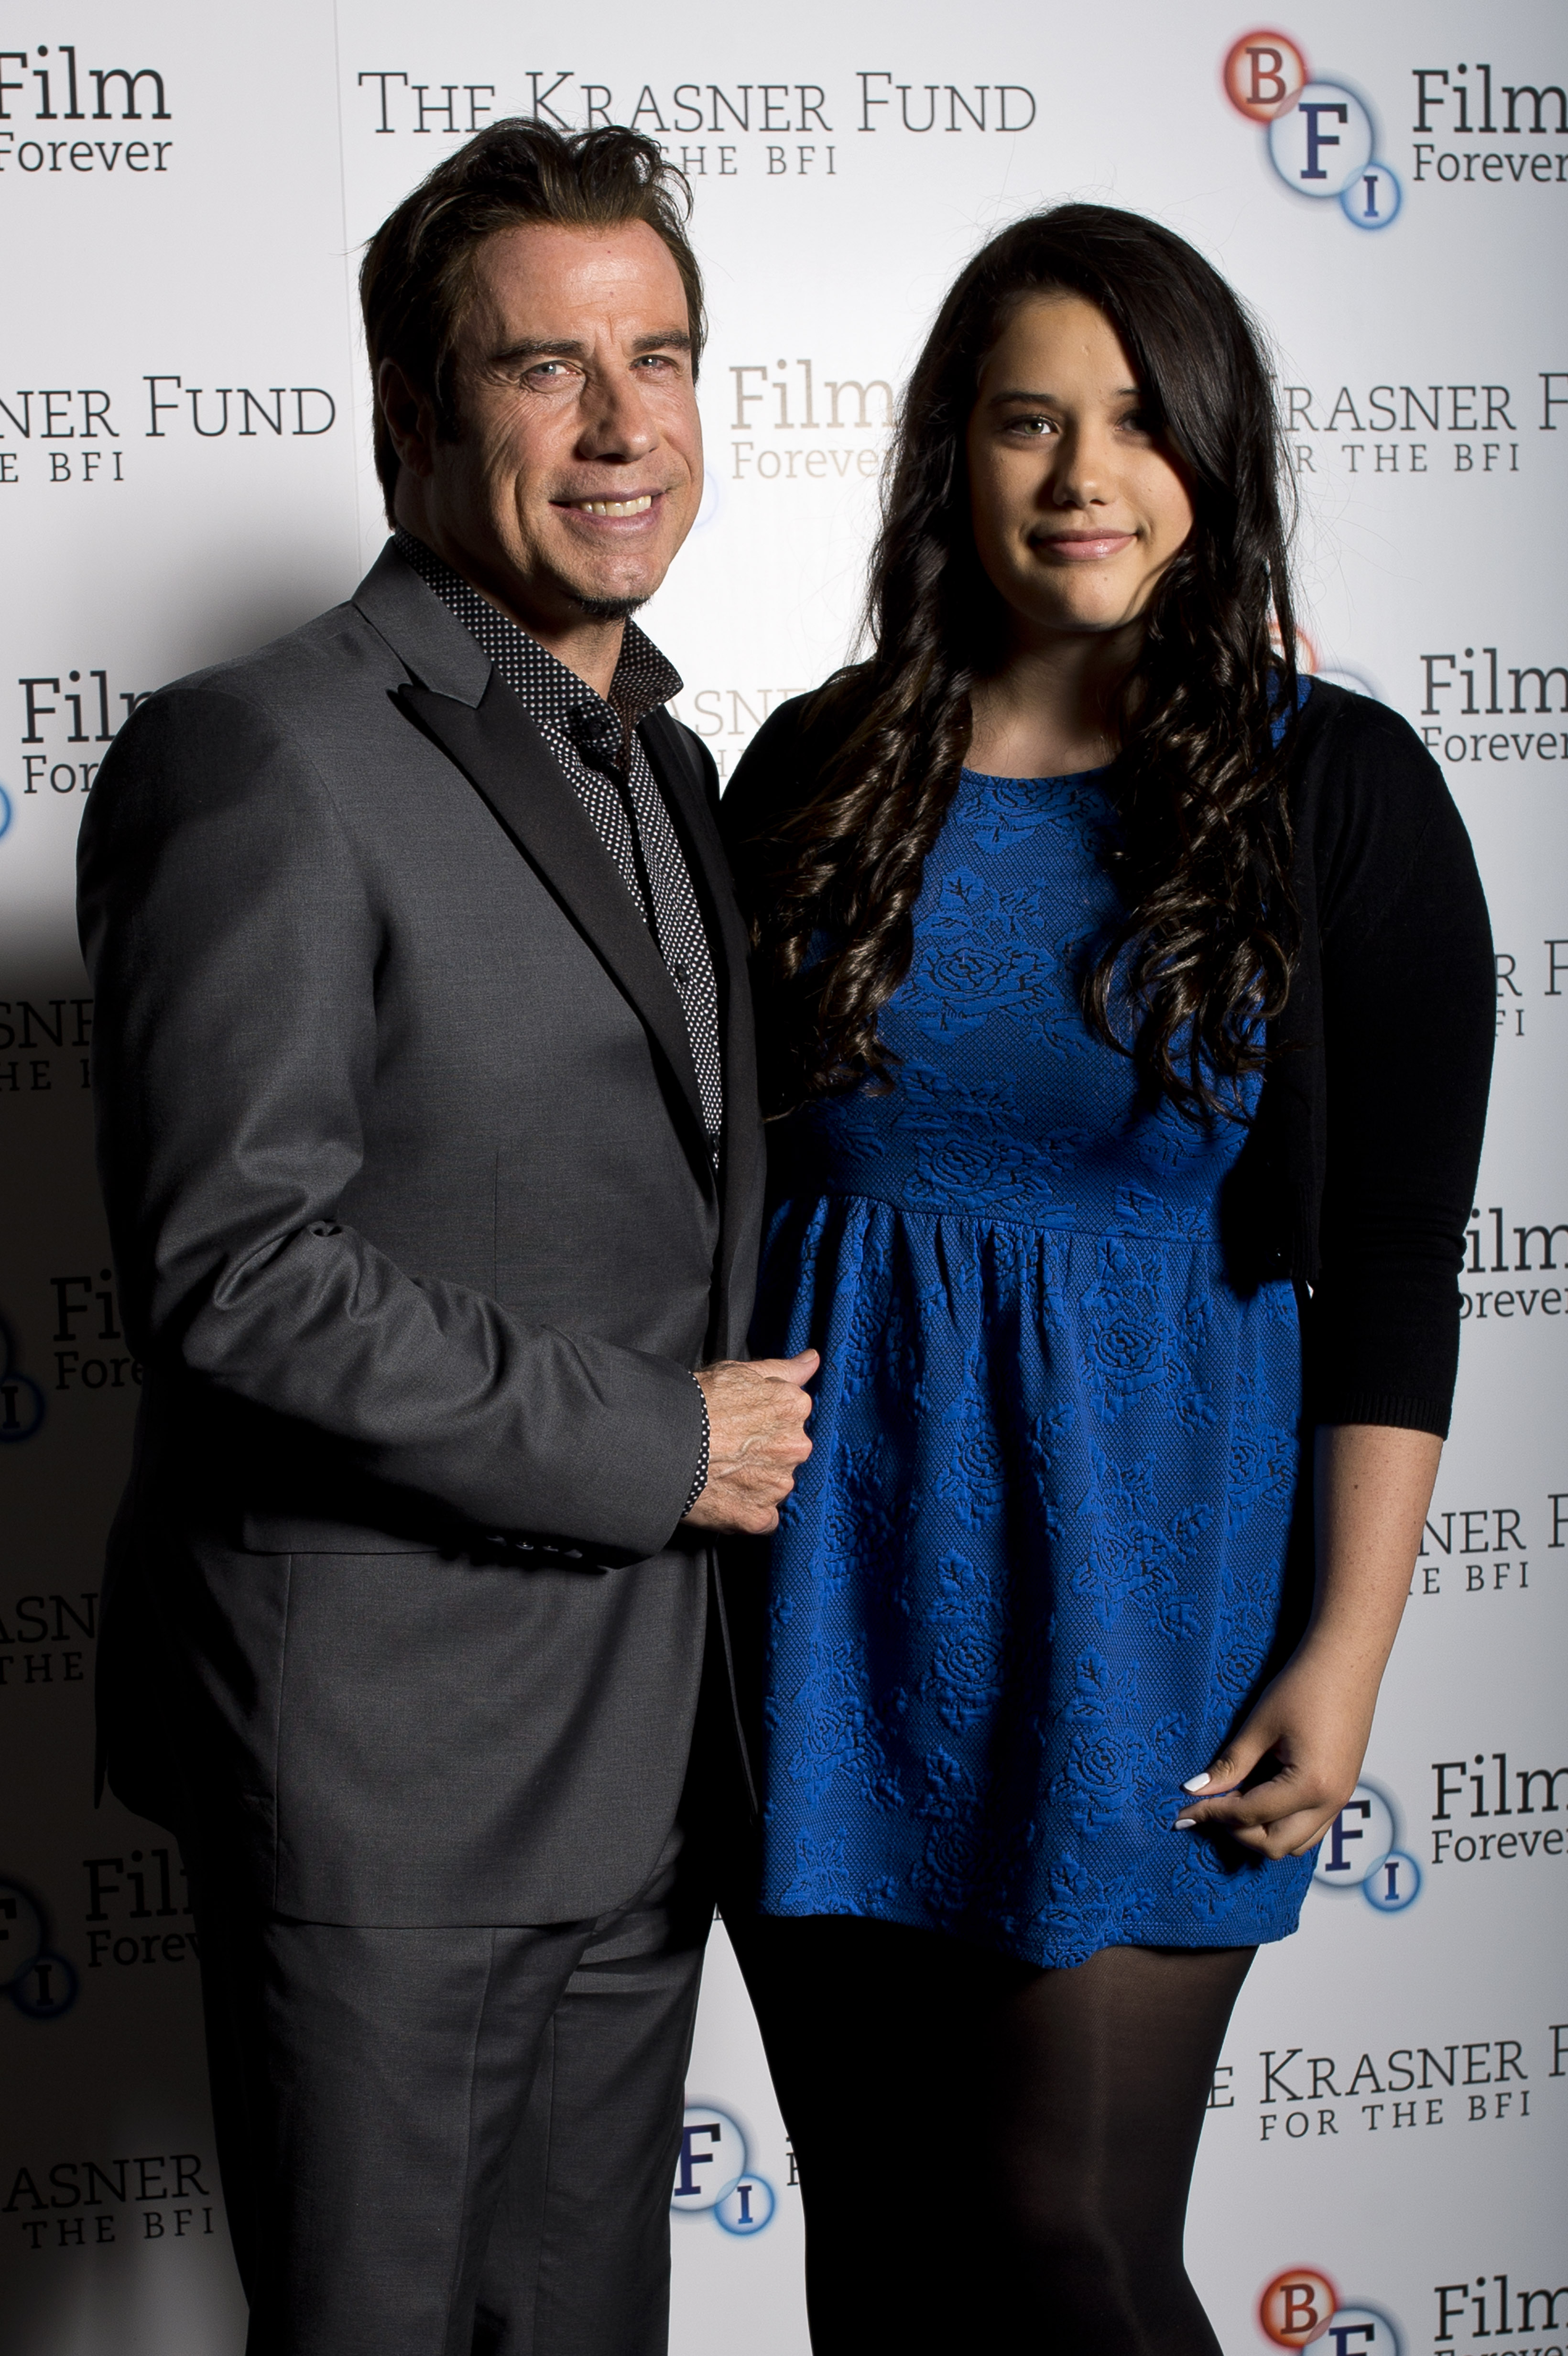 John Travolta and his daughter Ella attend an event where Travolta was honored by the BFI as part of The Krasner Fund for the BFI program on June 25, 2013, in London, England | Source: Getty Images